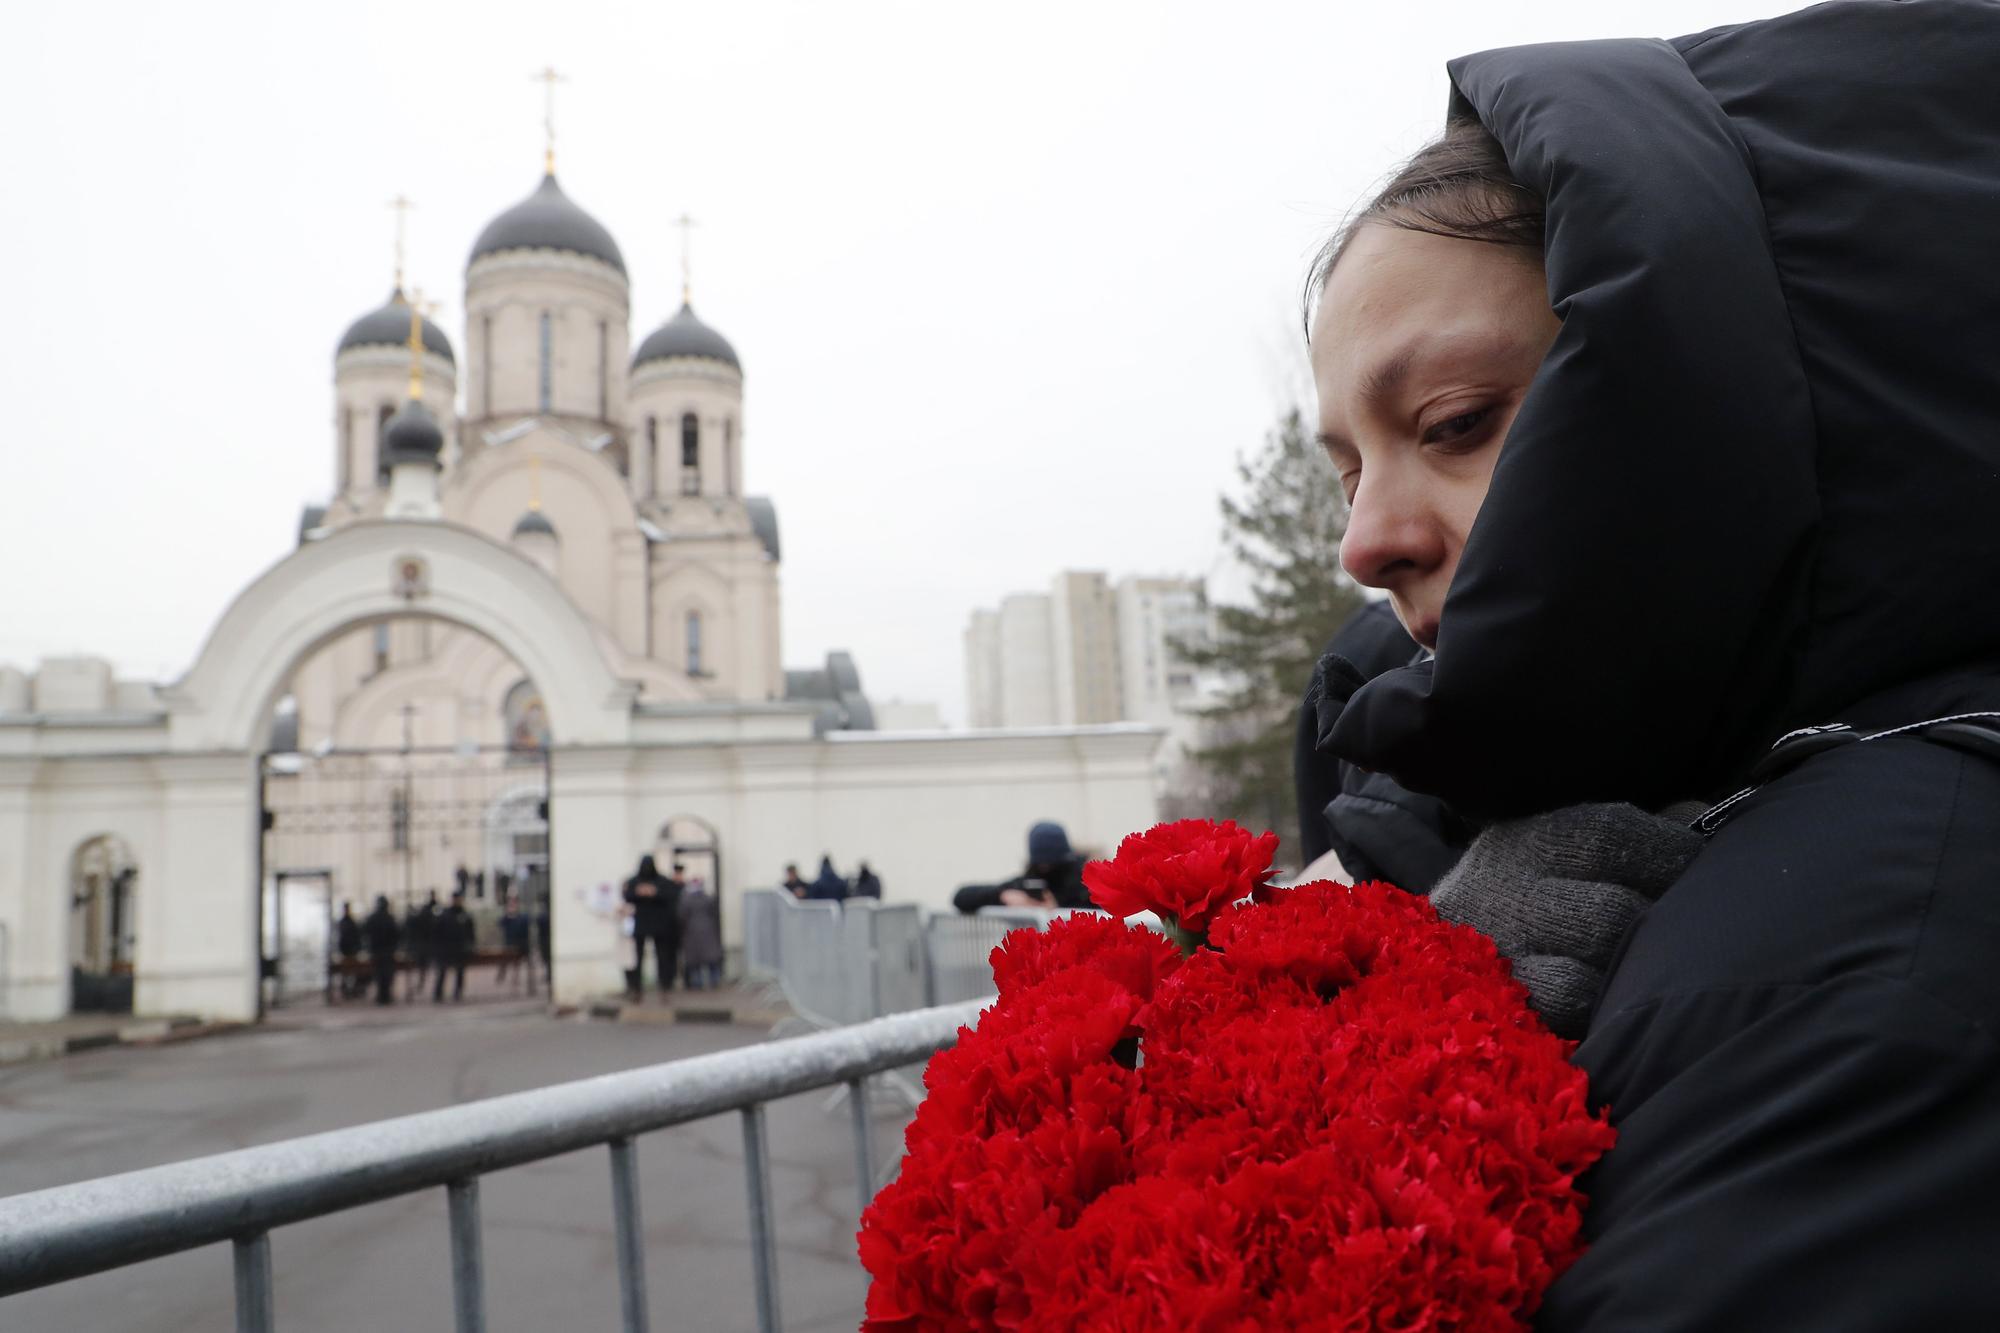 Funeral for Russian opposition leader Alexei Navalny in Moscow